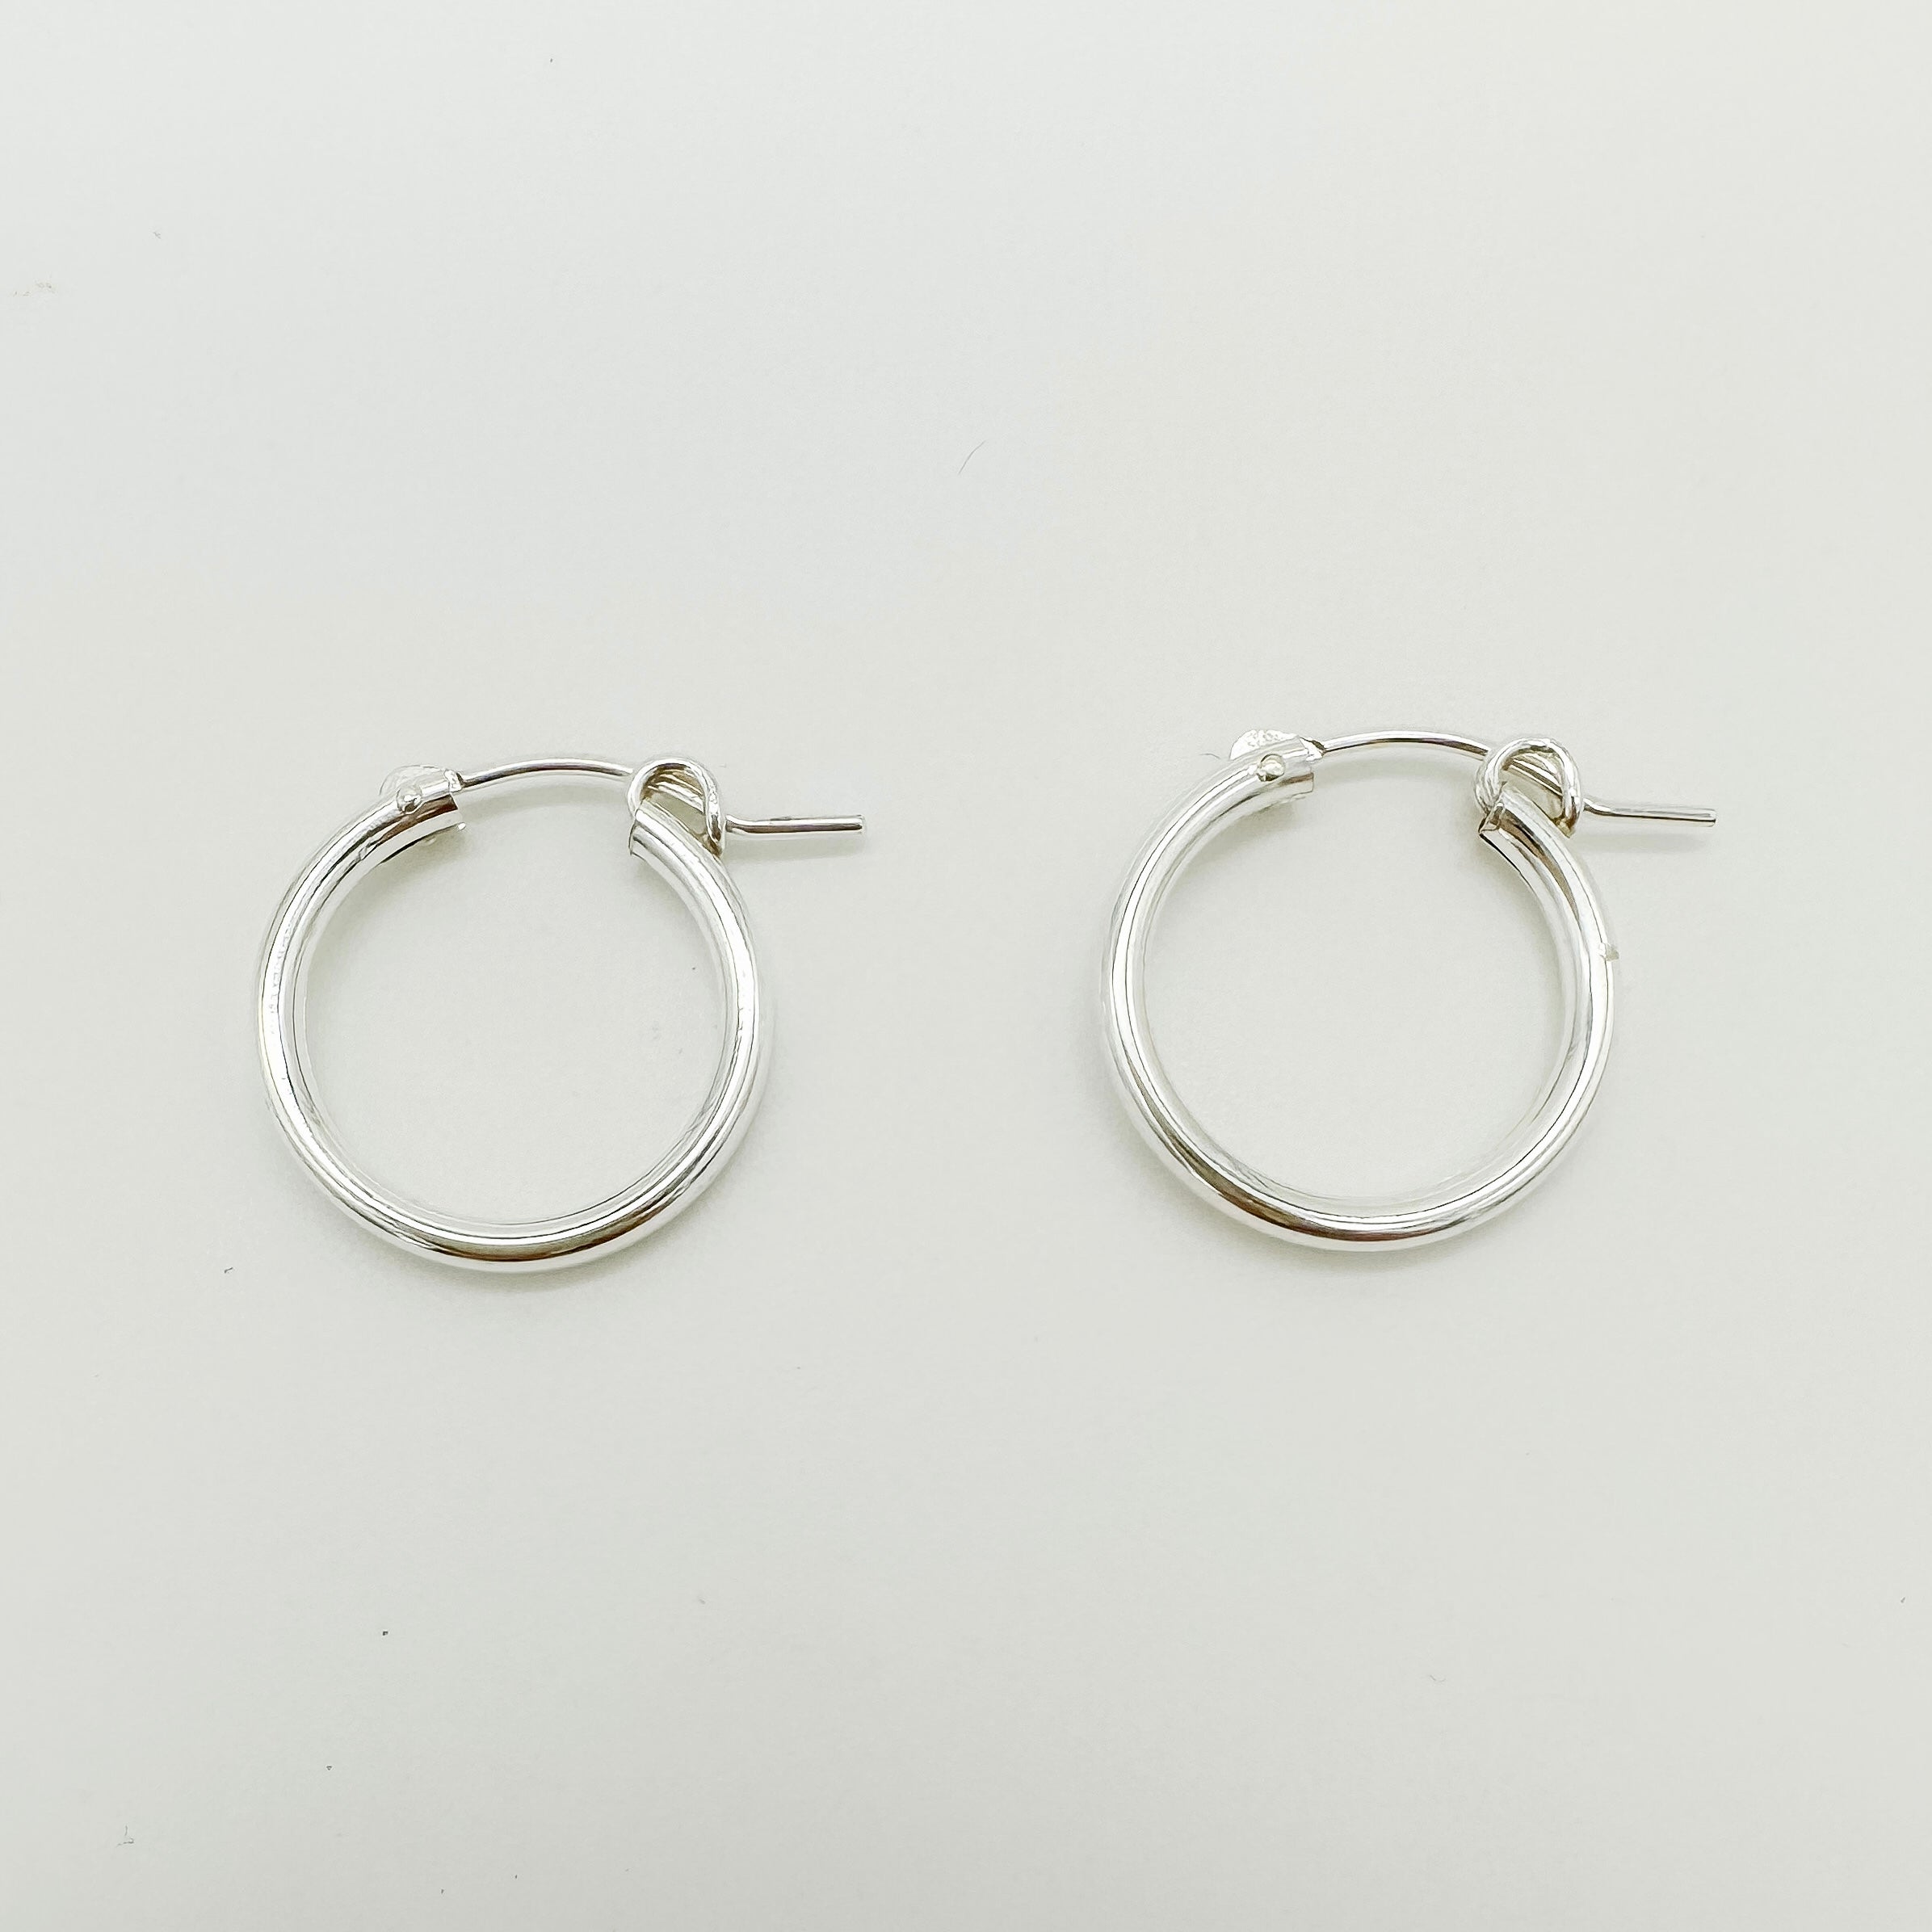 gold filled everyday hoops / essbe jewelry supply / hoops for everyday / sterling silver hoop earrings